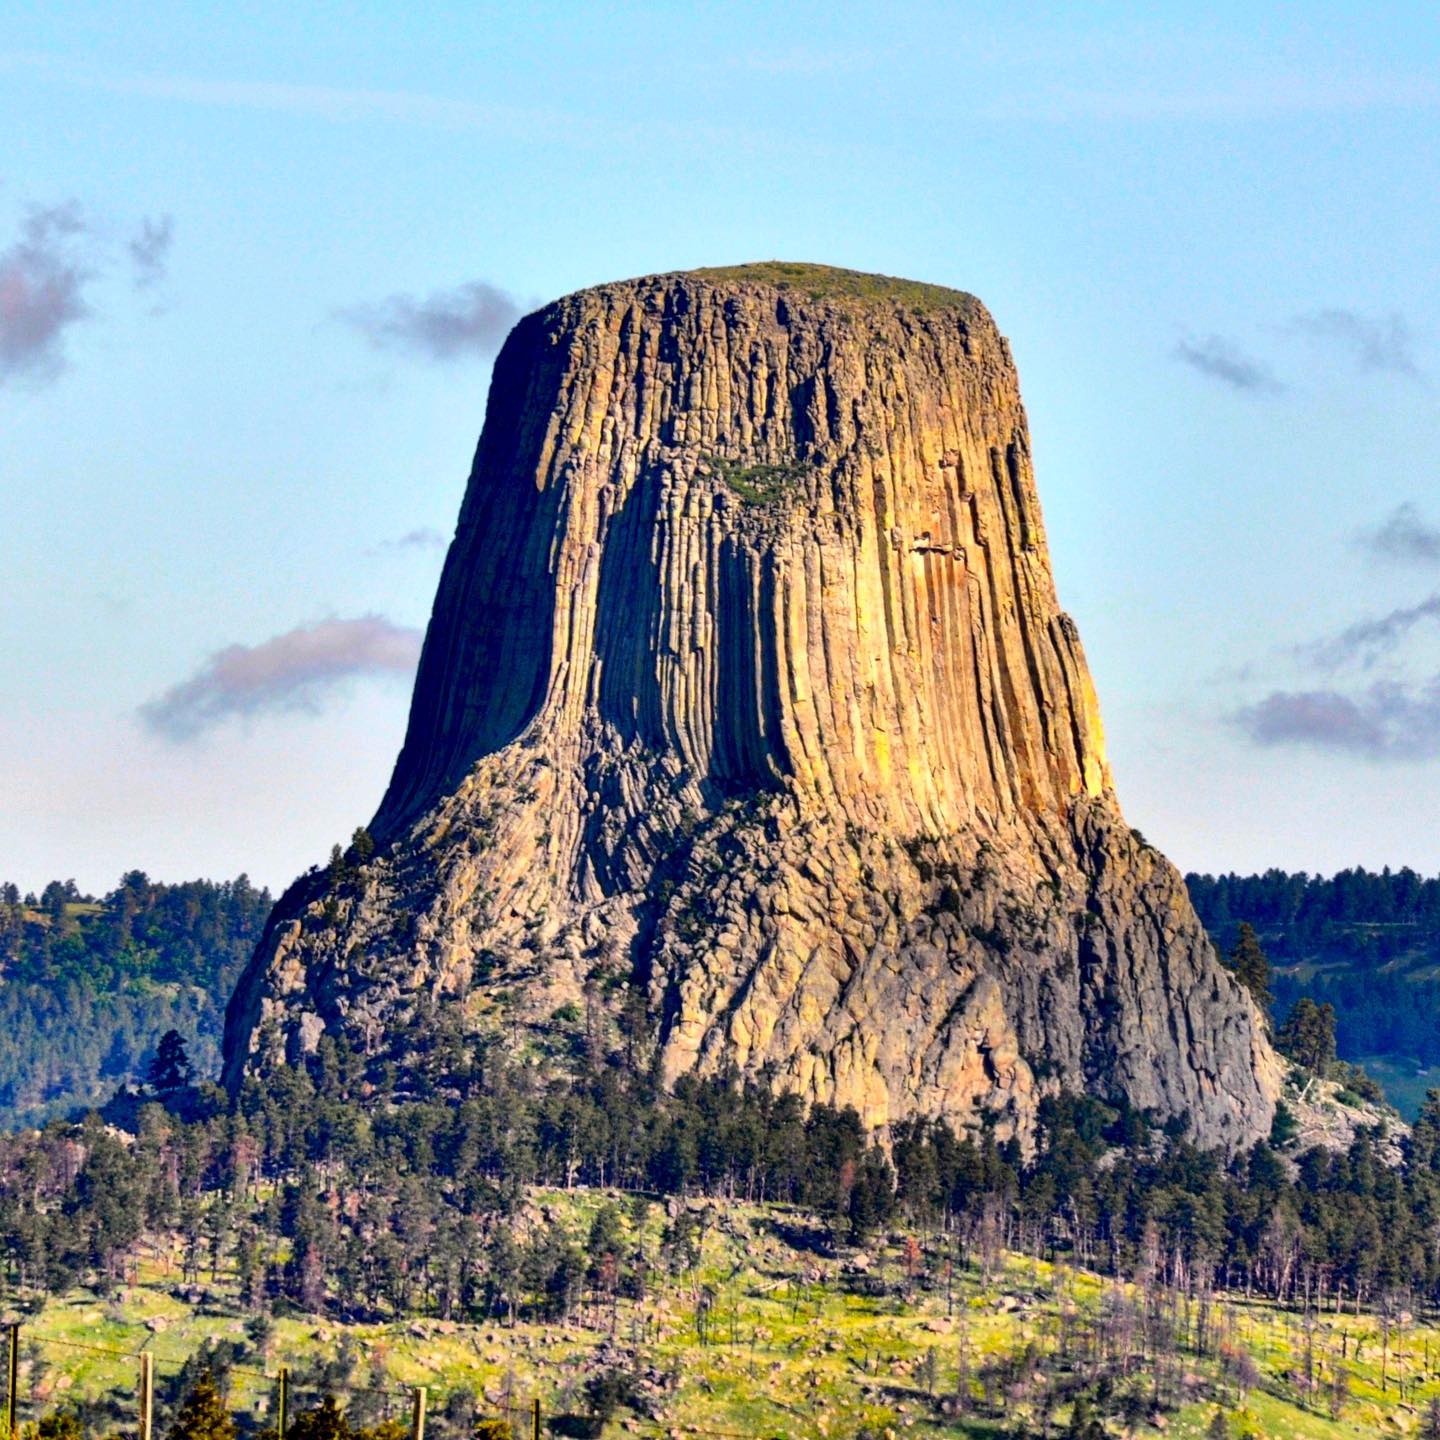 Devils Tower National Monument, Crook County. A devilishly good place for climbing and hiking 🥾🧗🏻‍♀️
#usatravels #roadtripusa🇺🇸 #crookcounty #devilstower #devilstowernationalmonument #nature #naturephotography #naturelovers #nature_perfection #climbing #hiking #hikinglove #beautifulnature #awesomeplaces #beautifulamerica #instatravel